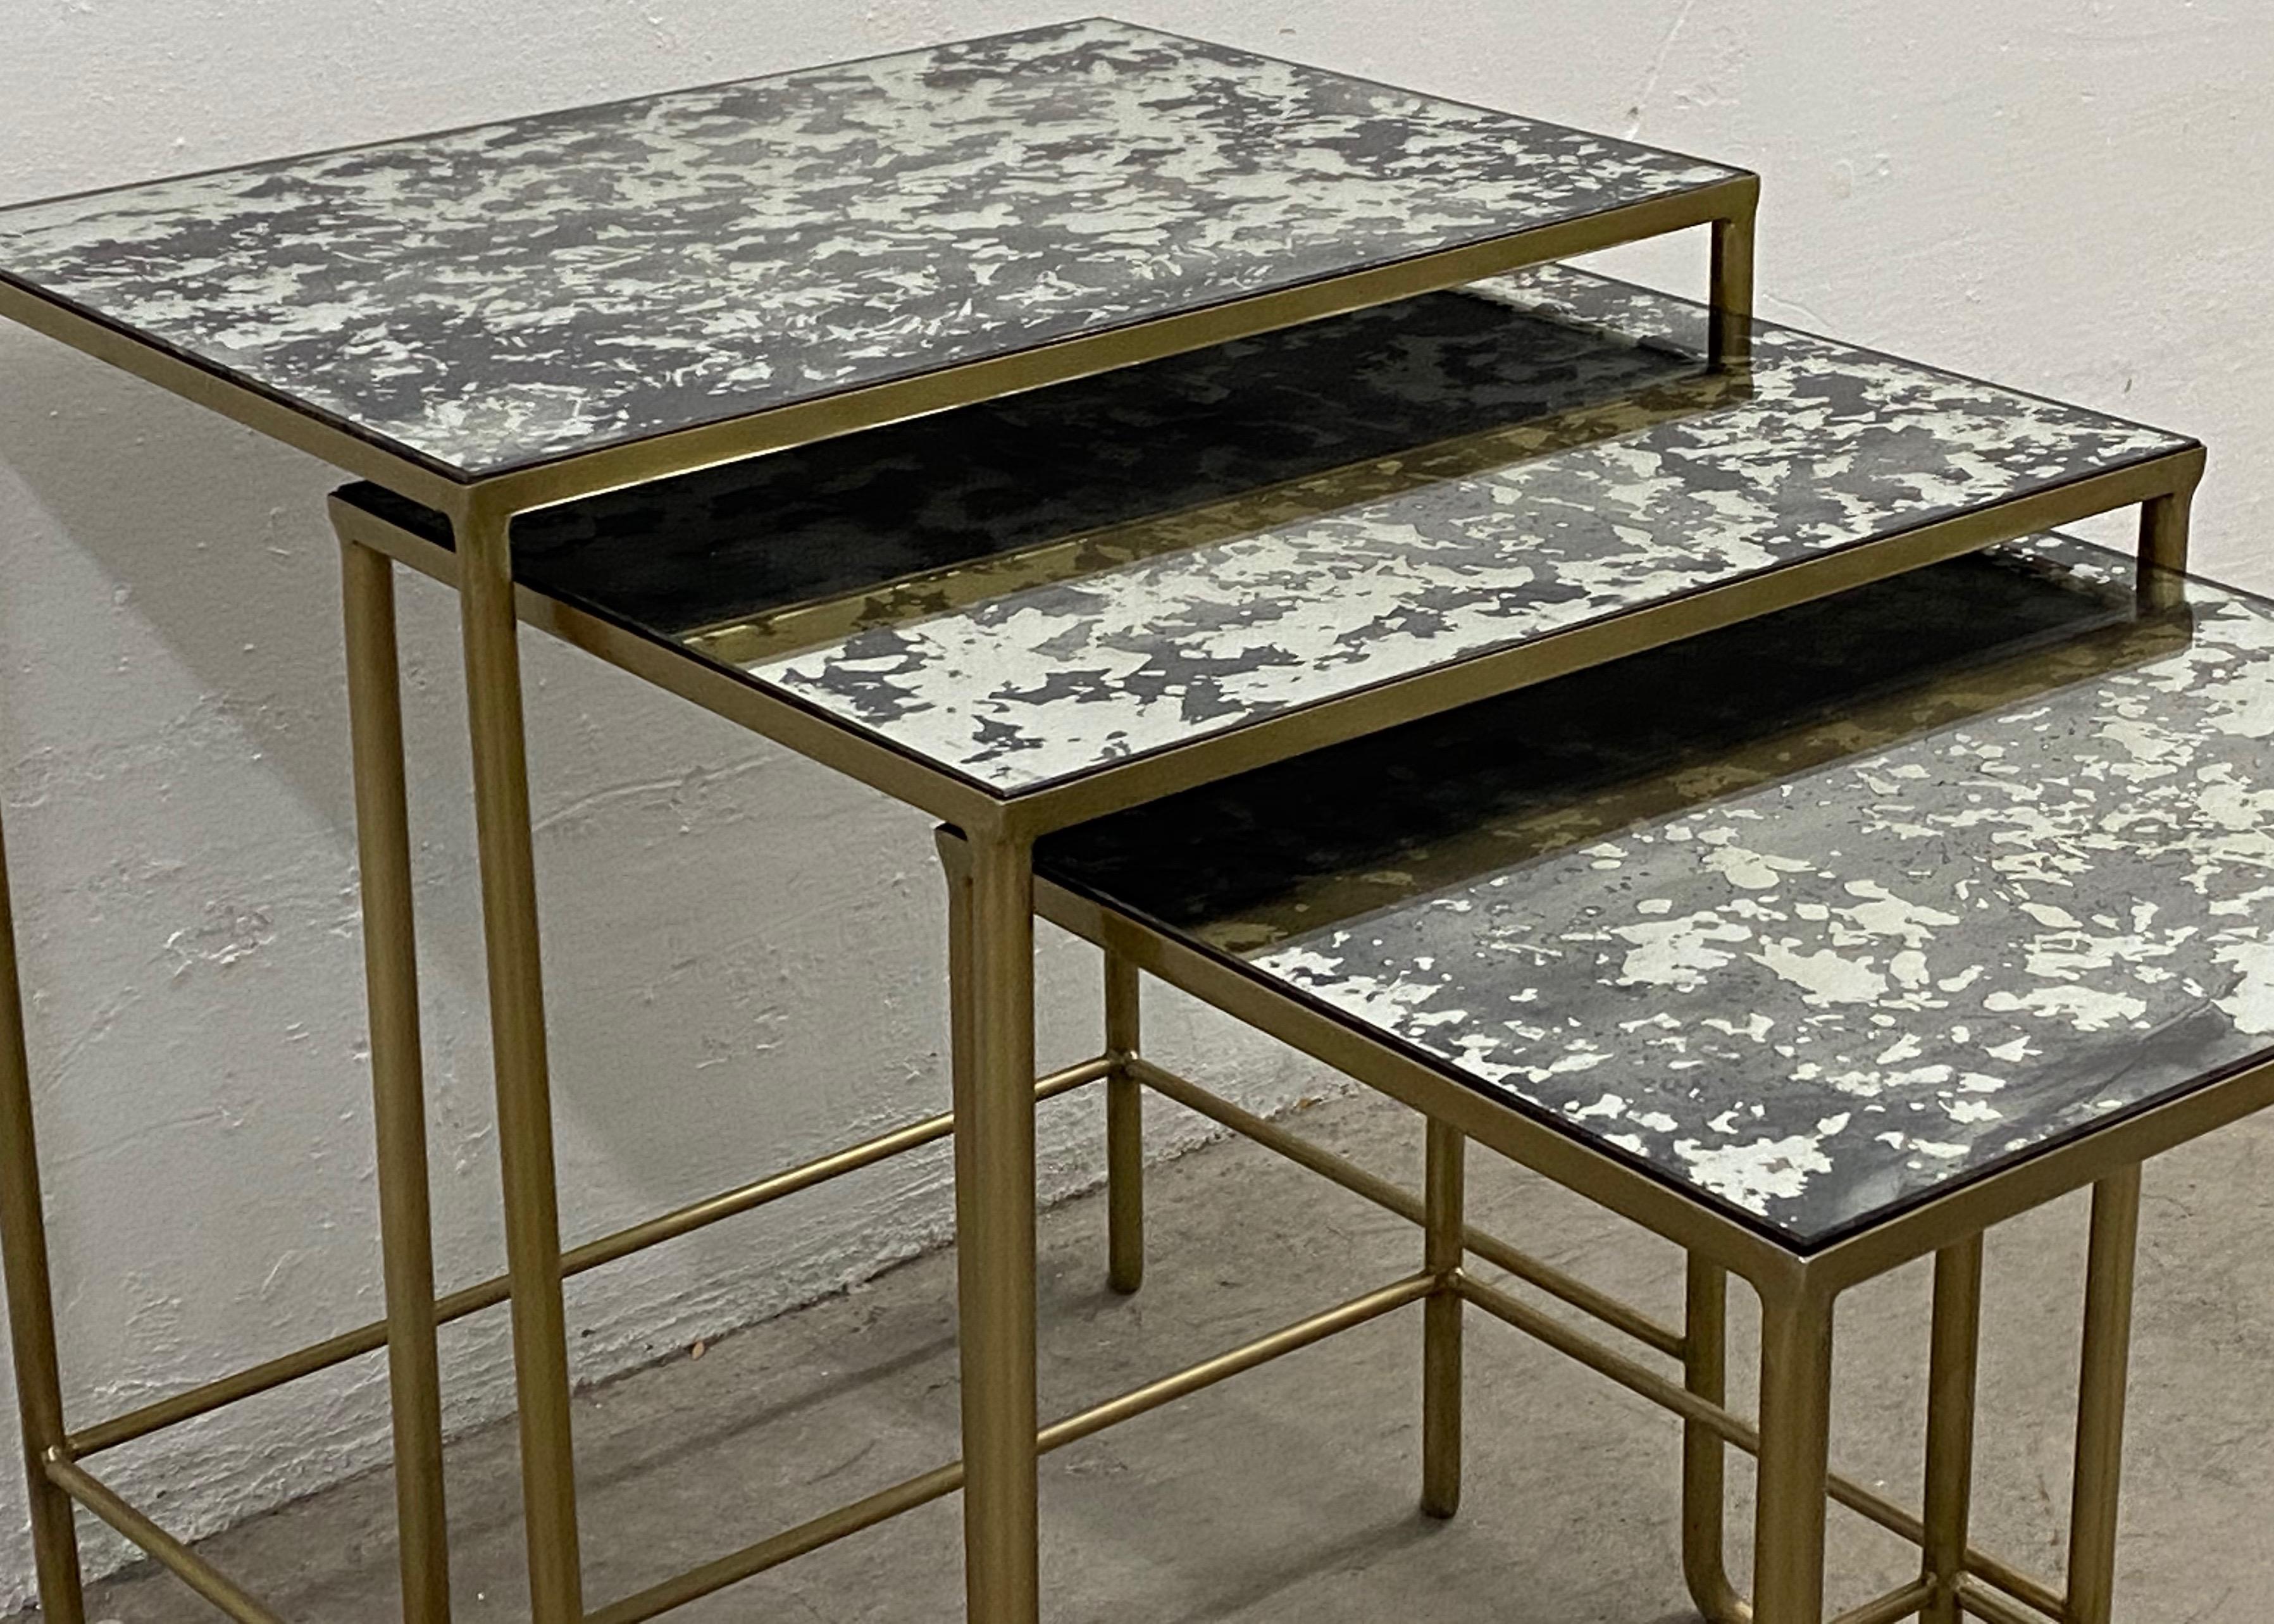 American Set of Three Contemporary Brass Plate Steel and Flecked Mirror Nesting Tables